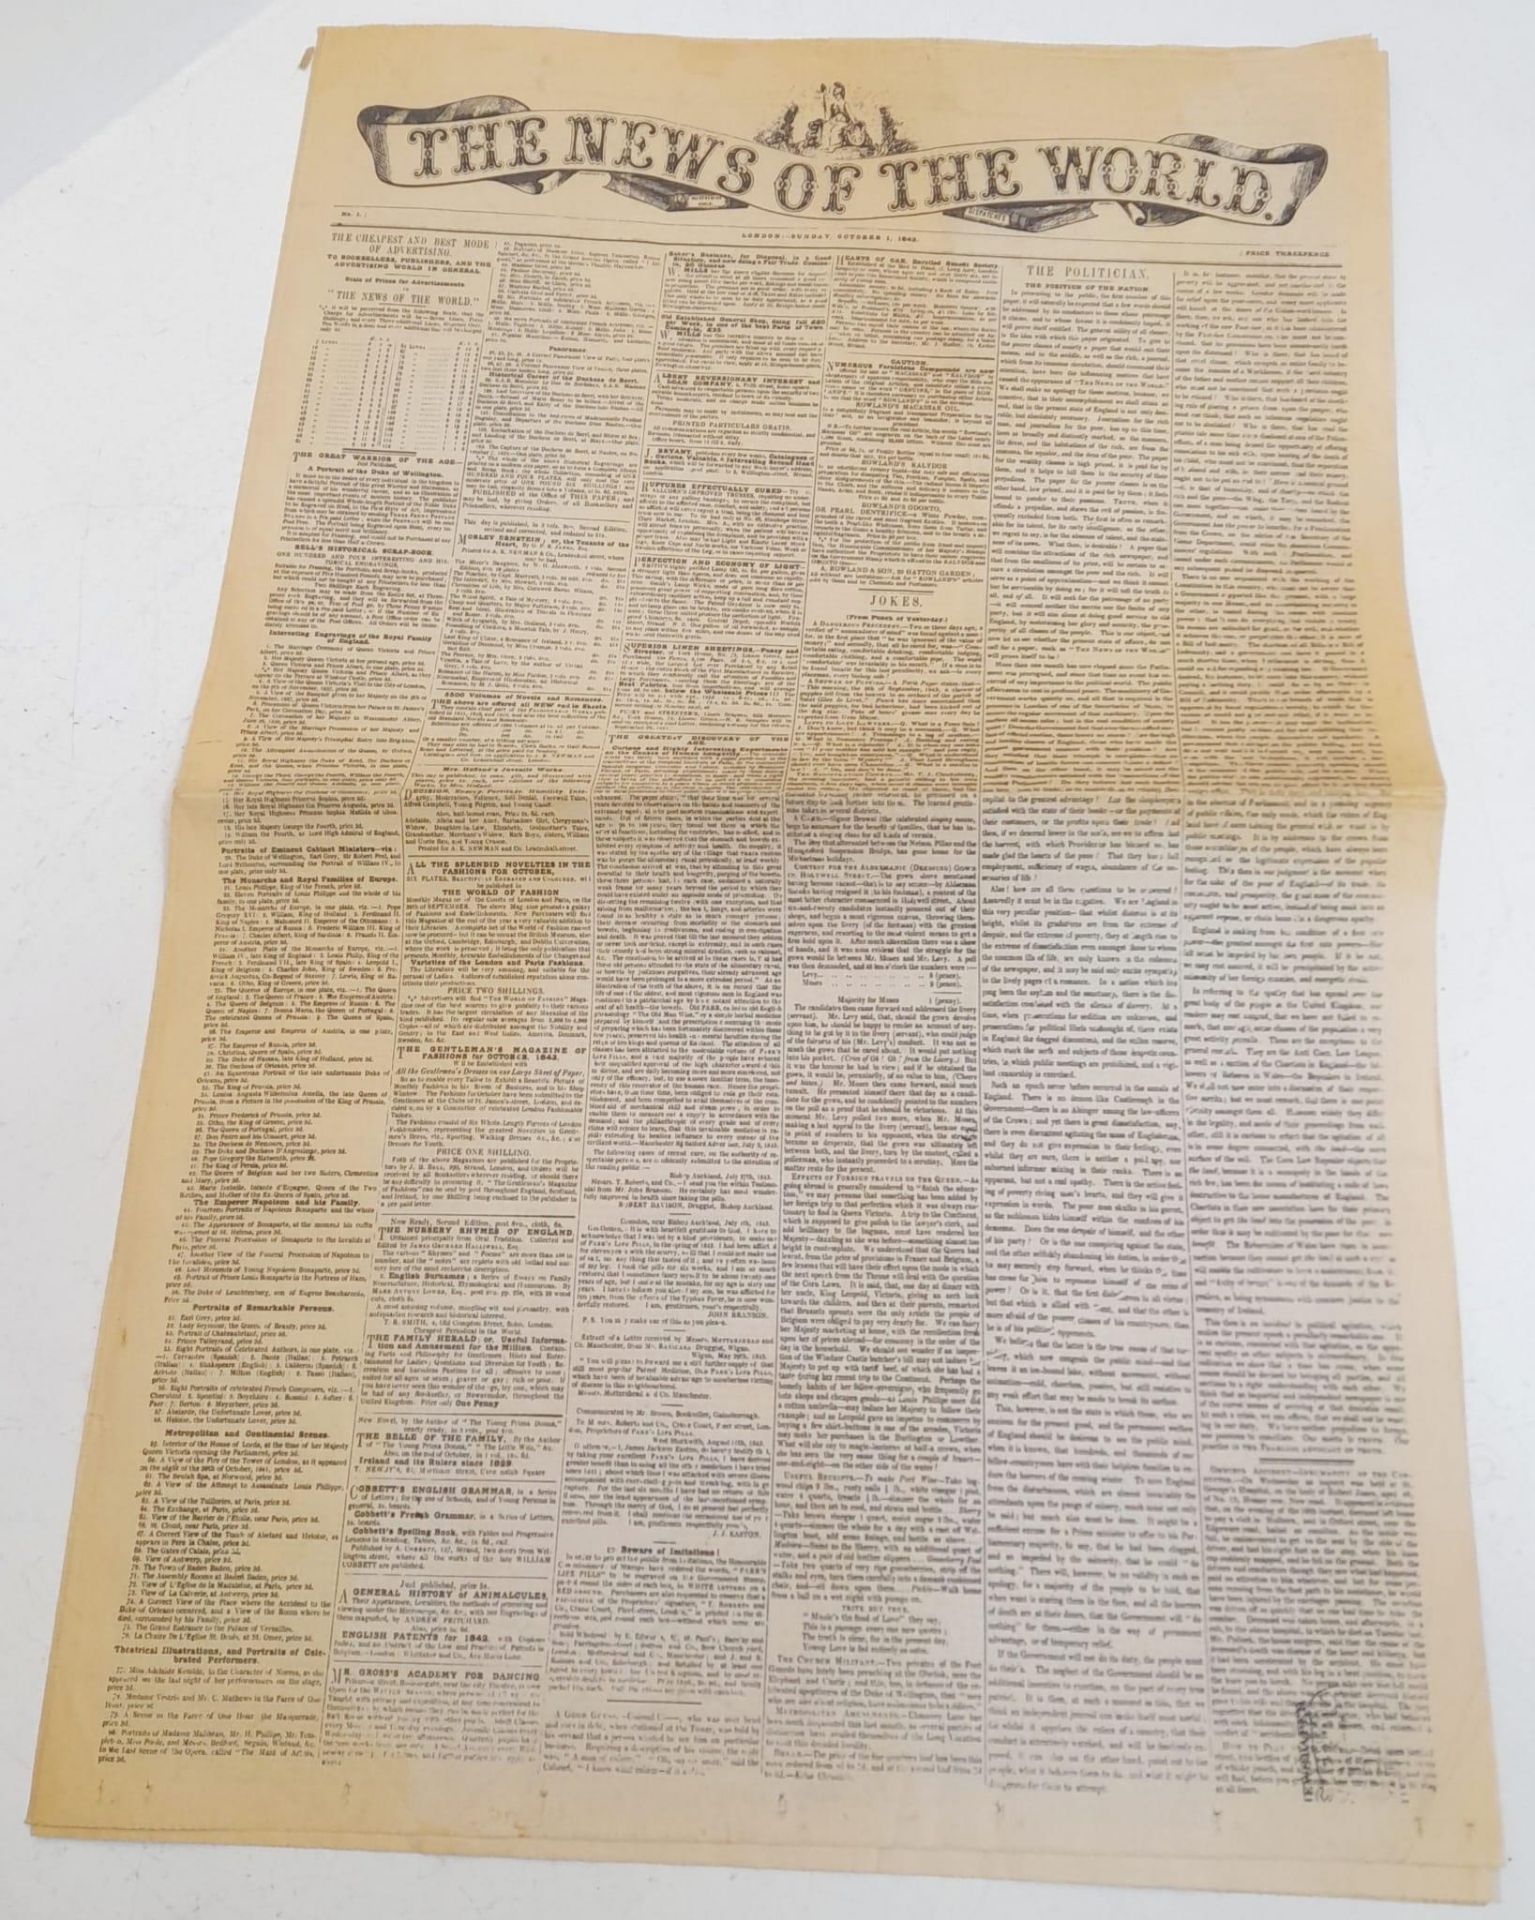 An October 1st 1843, 1st Edition Copy of The News of the World. Found in a North London home in 1966